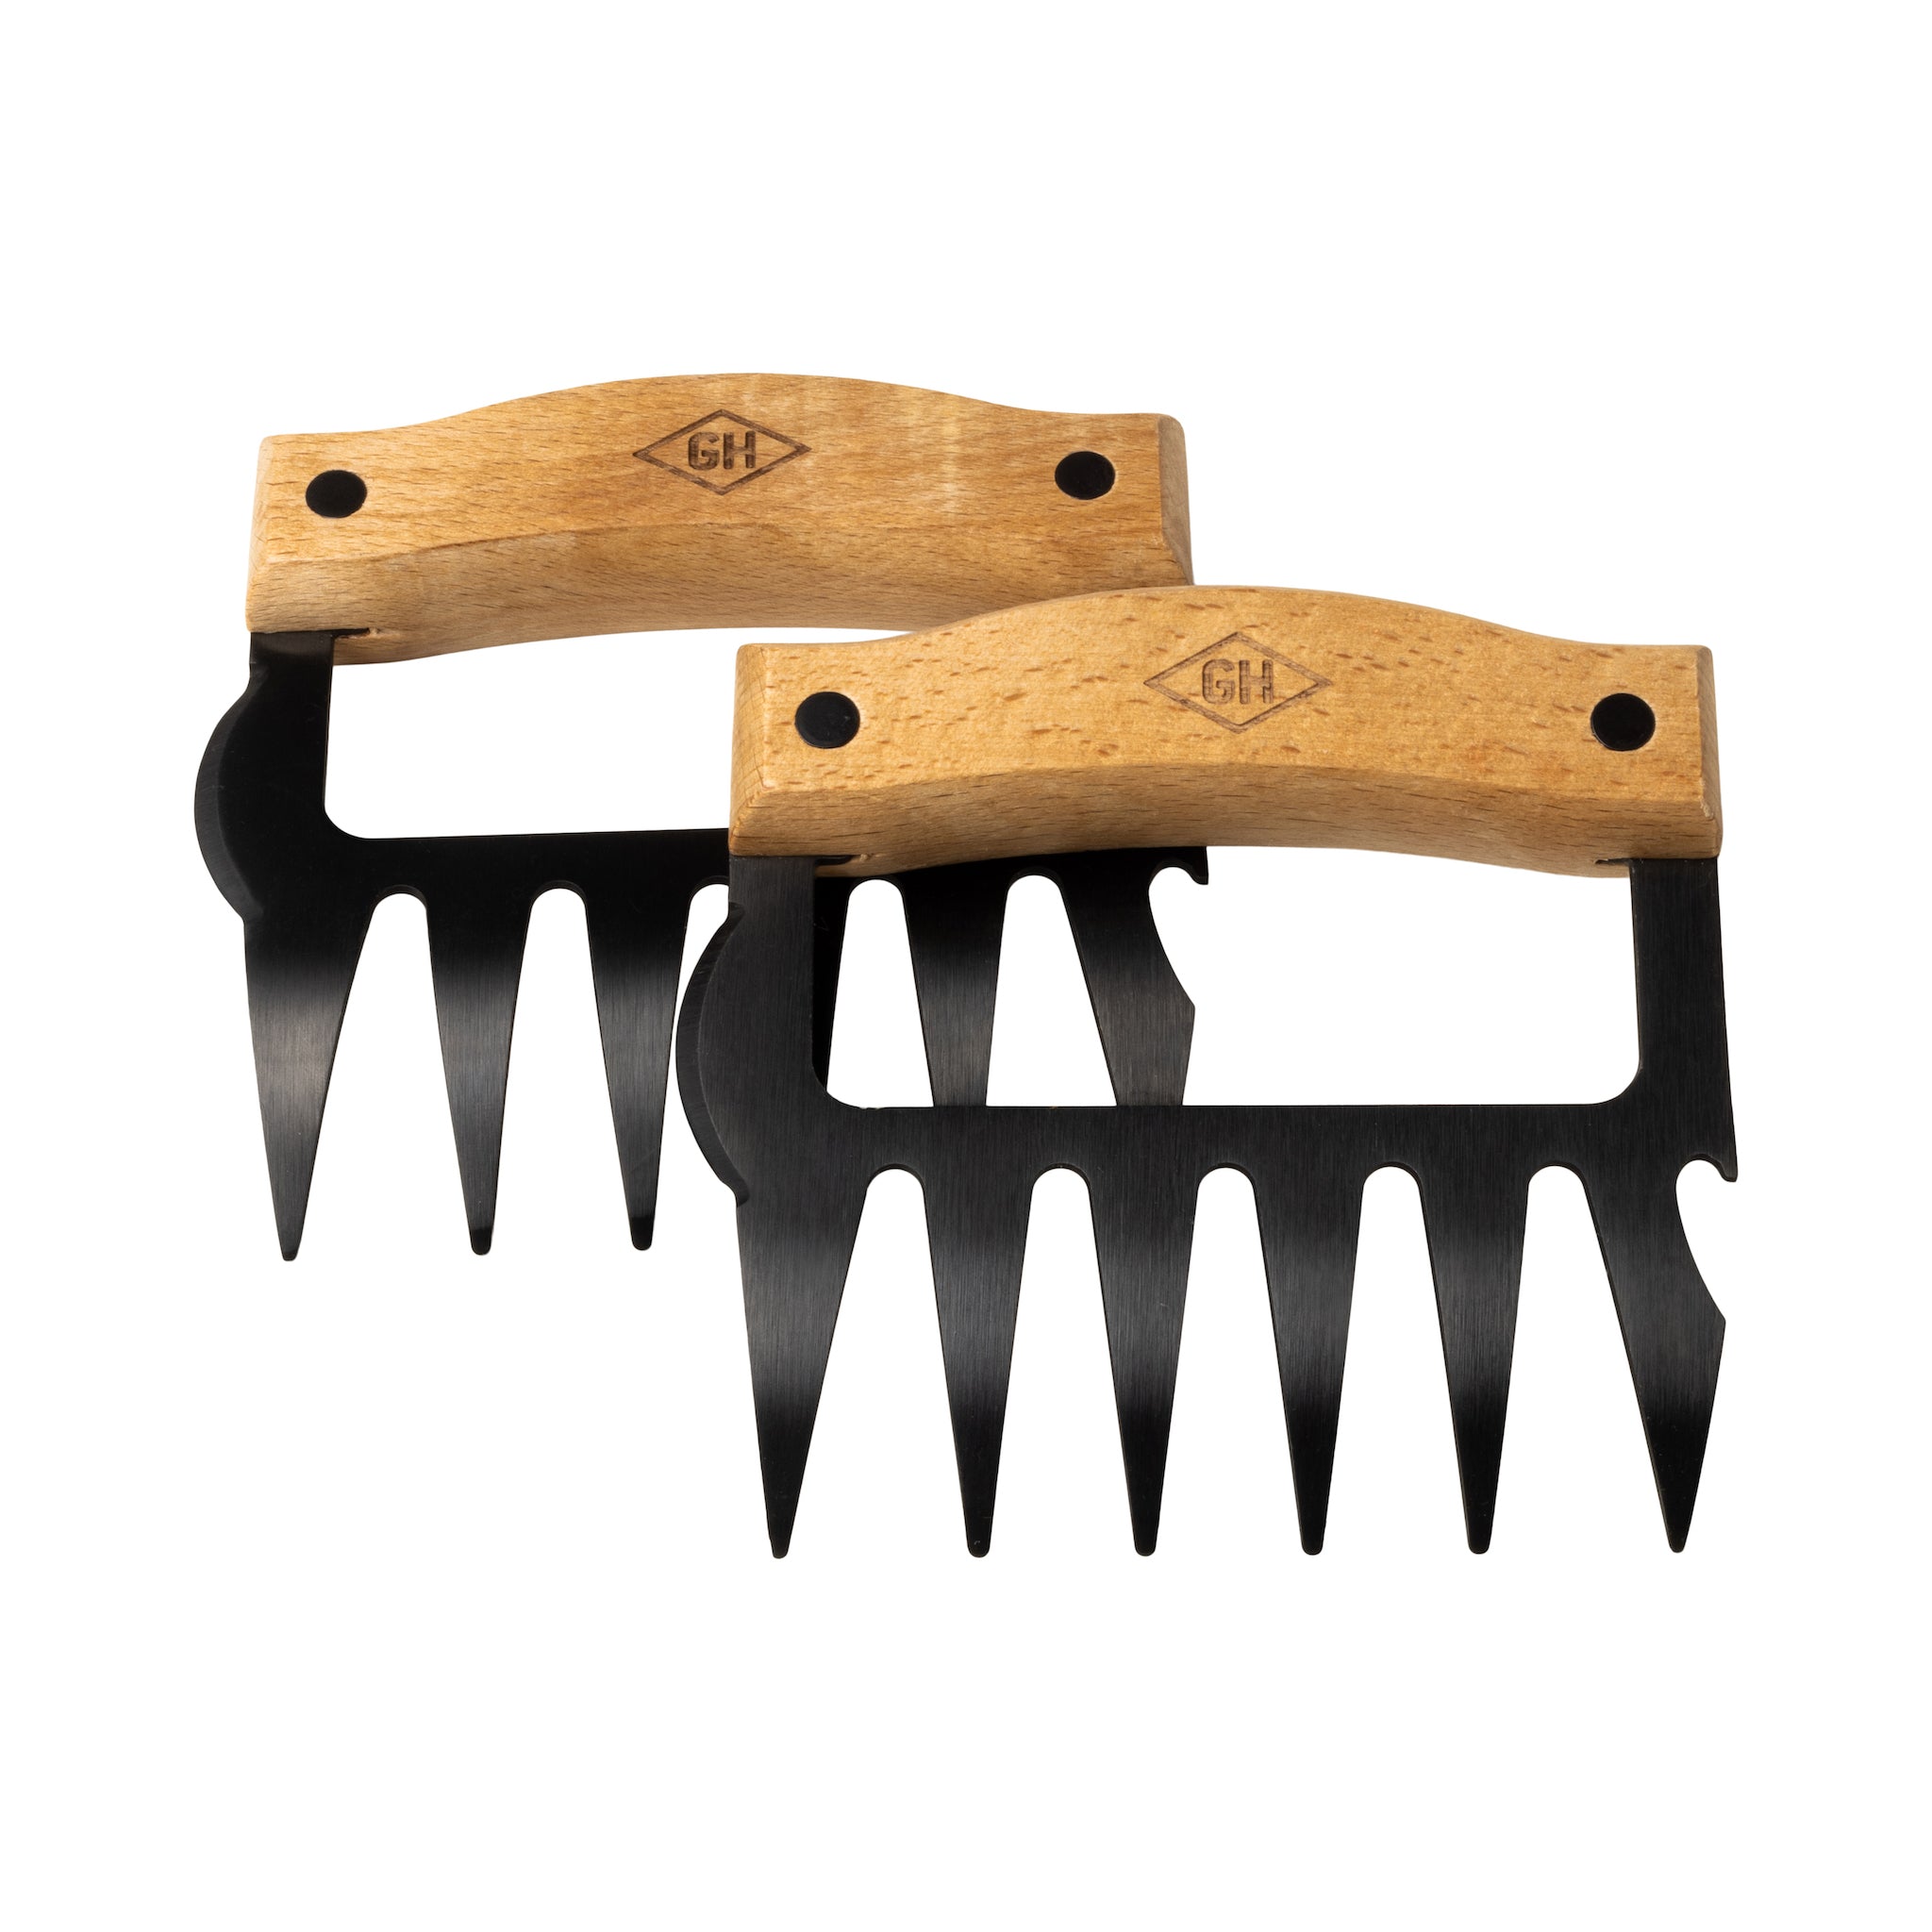 Dalstrong Meat Shredding Claws - Multi-Use Shredding Tool - X2 - Premium HC Stainless Steel - G10 Handles - BBQ